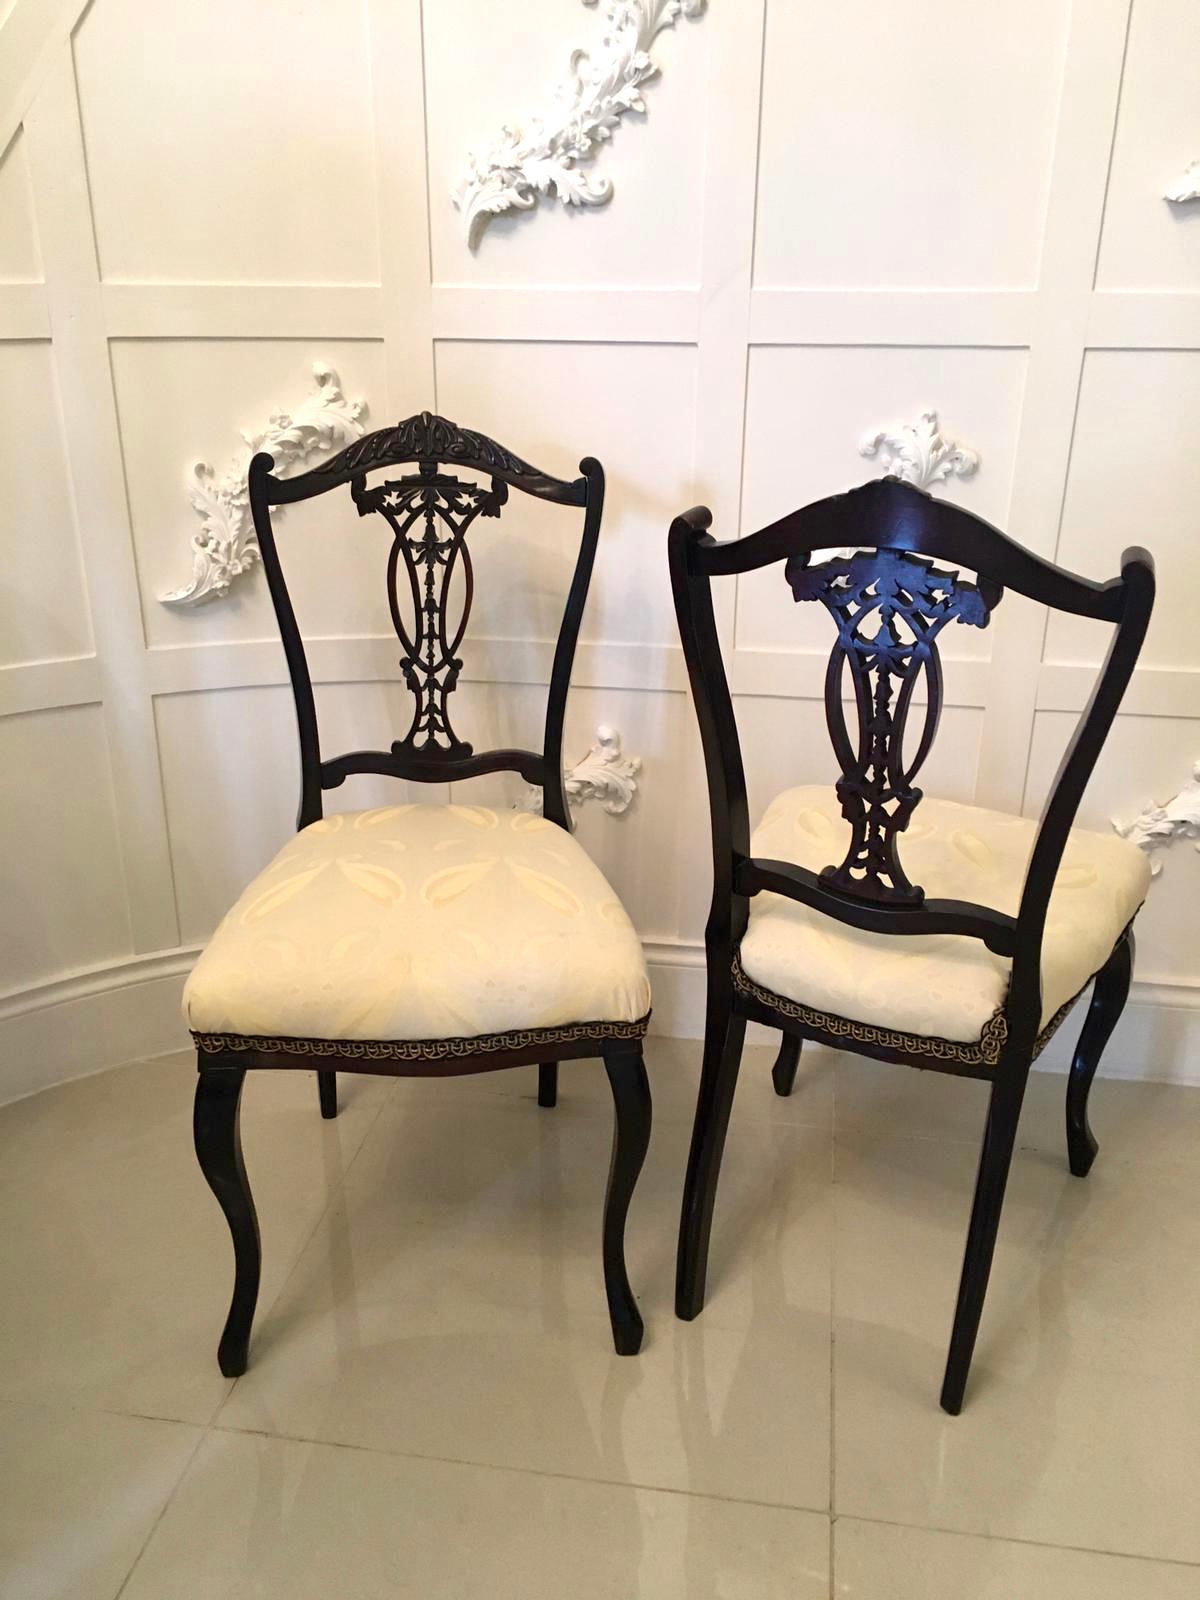 A quality pair of antique carved rosewood desk or side chairs. This pair have a very attractively carved top rail and center splat. They have been tastefully reupholstered in a quality fabric. They are raised on cabriole legs to the front and out